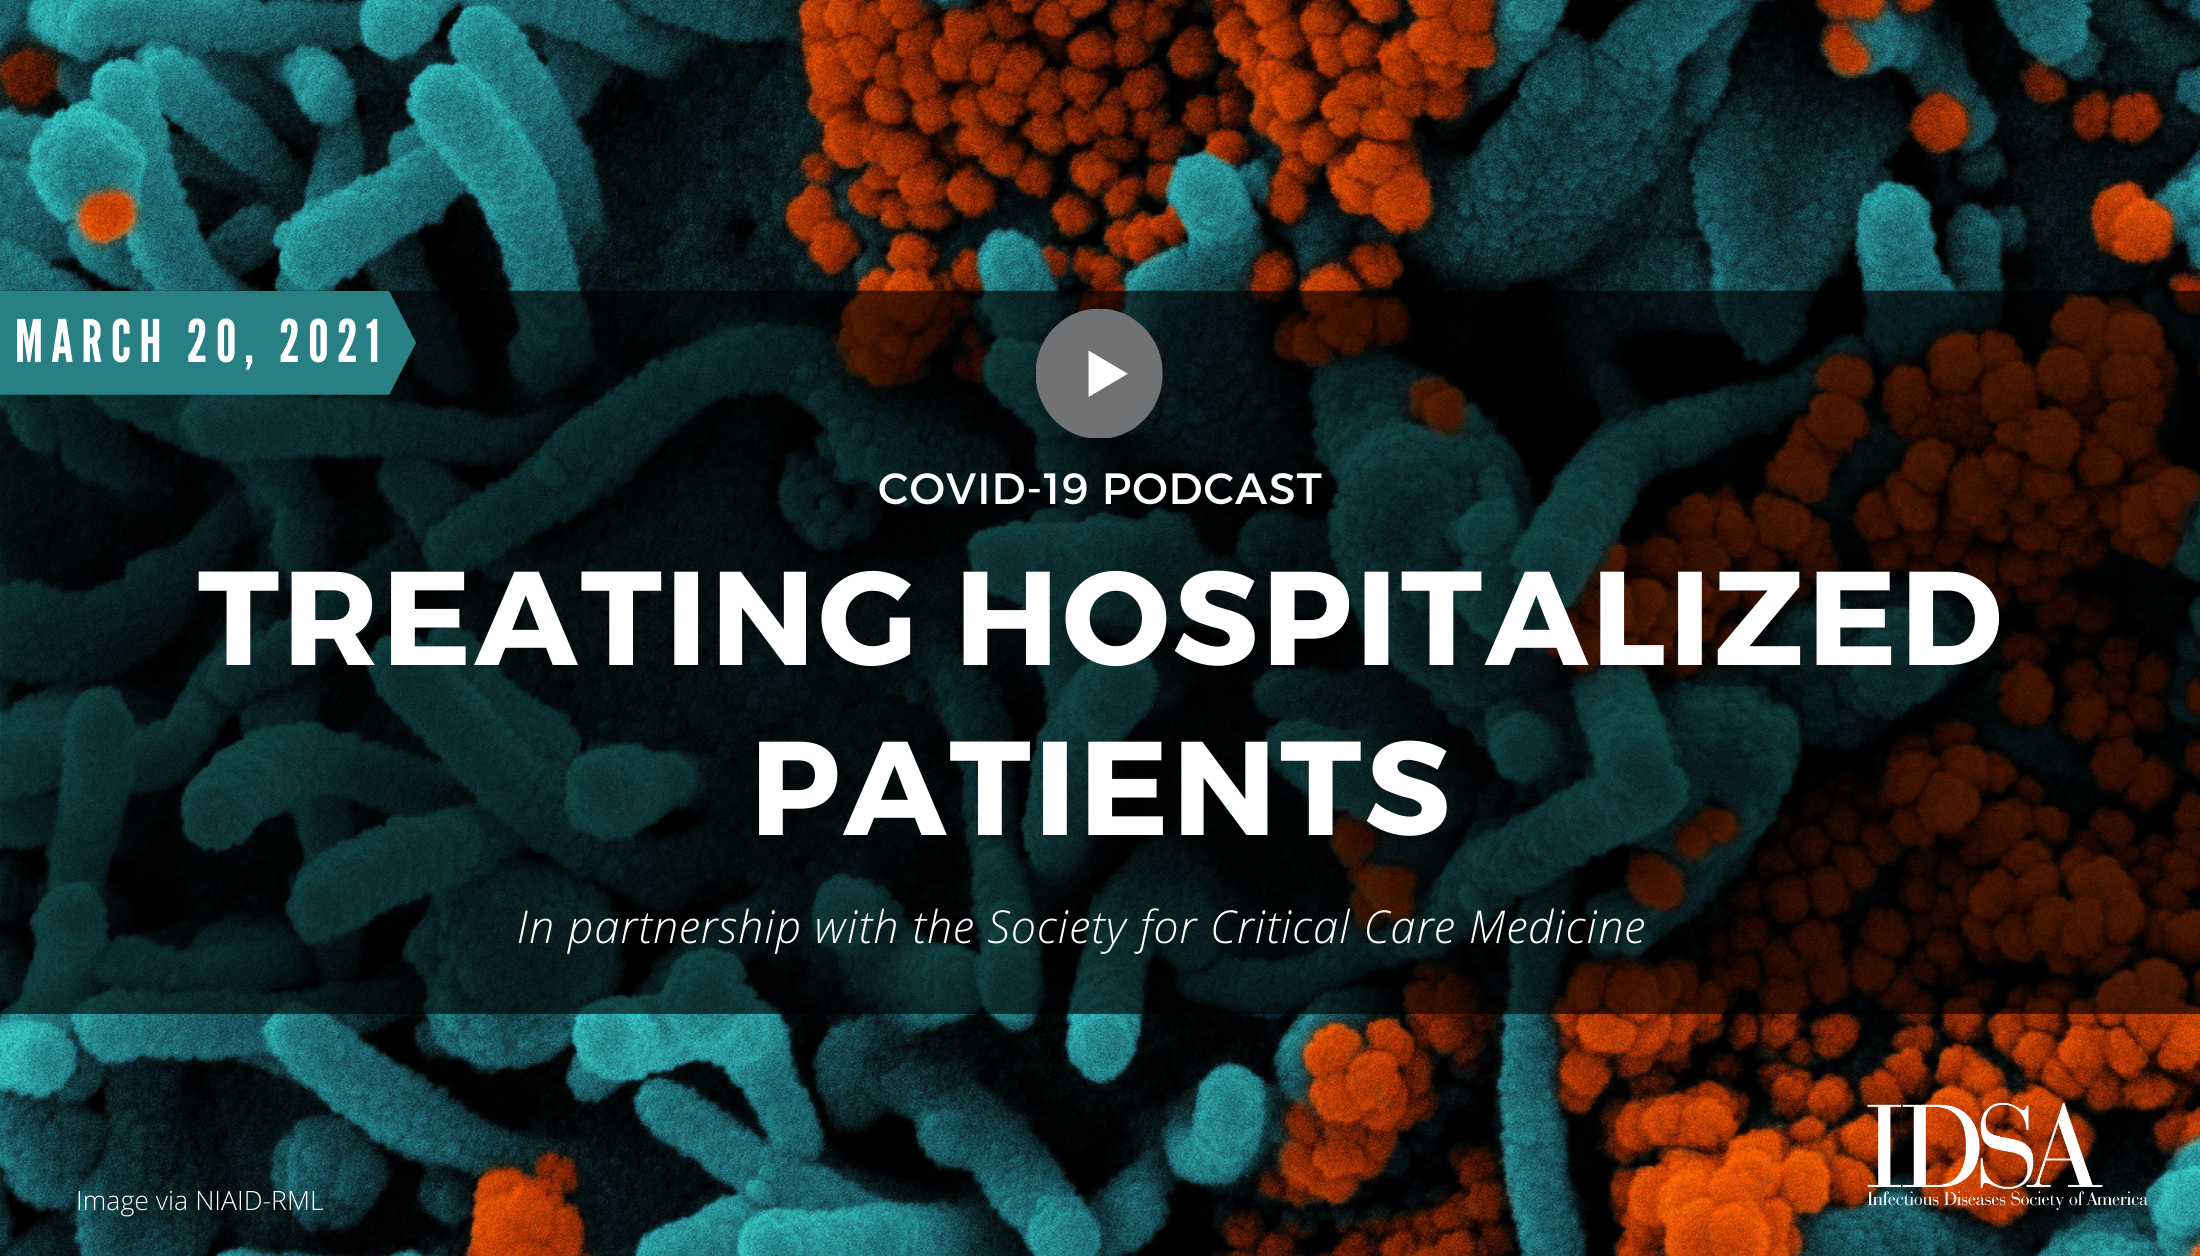 COVID-19 Treating Hospitalized Patients